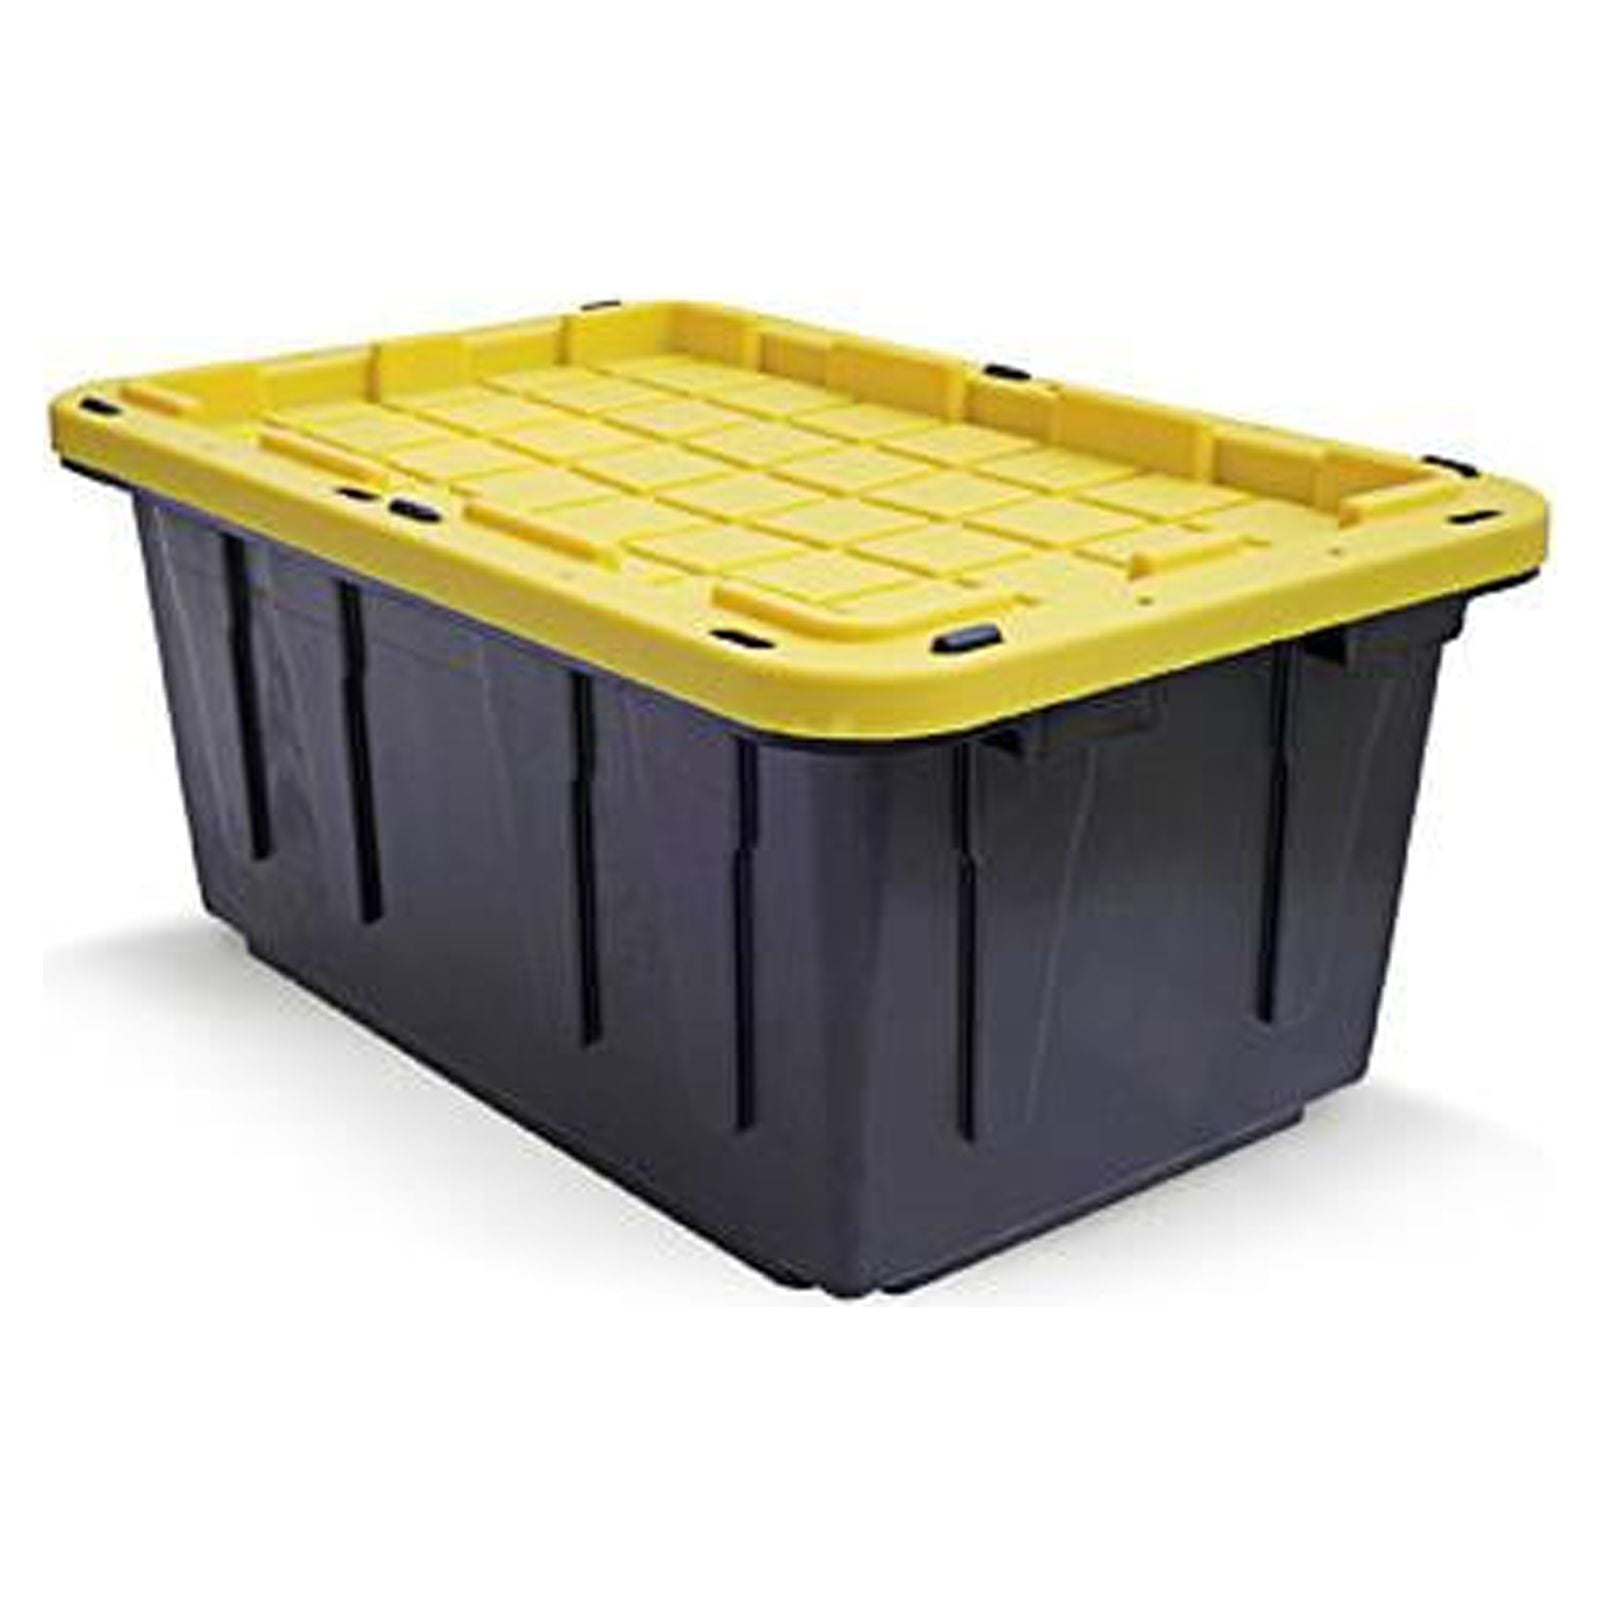 HDX 17 Gal. Storage Tote in Black-HDX17GONLINE(6) - The Home Depot